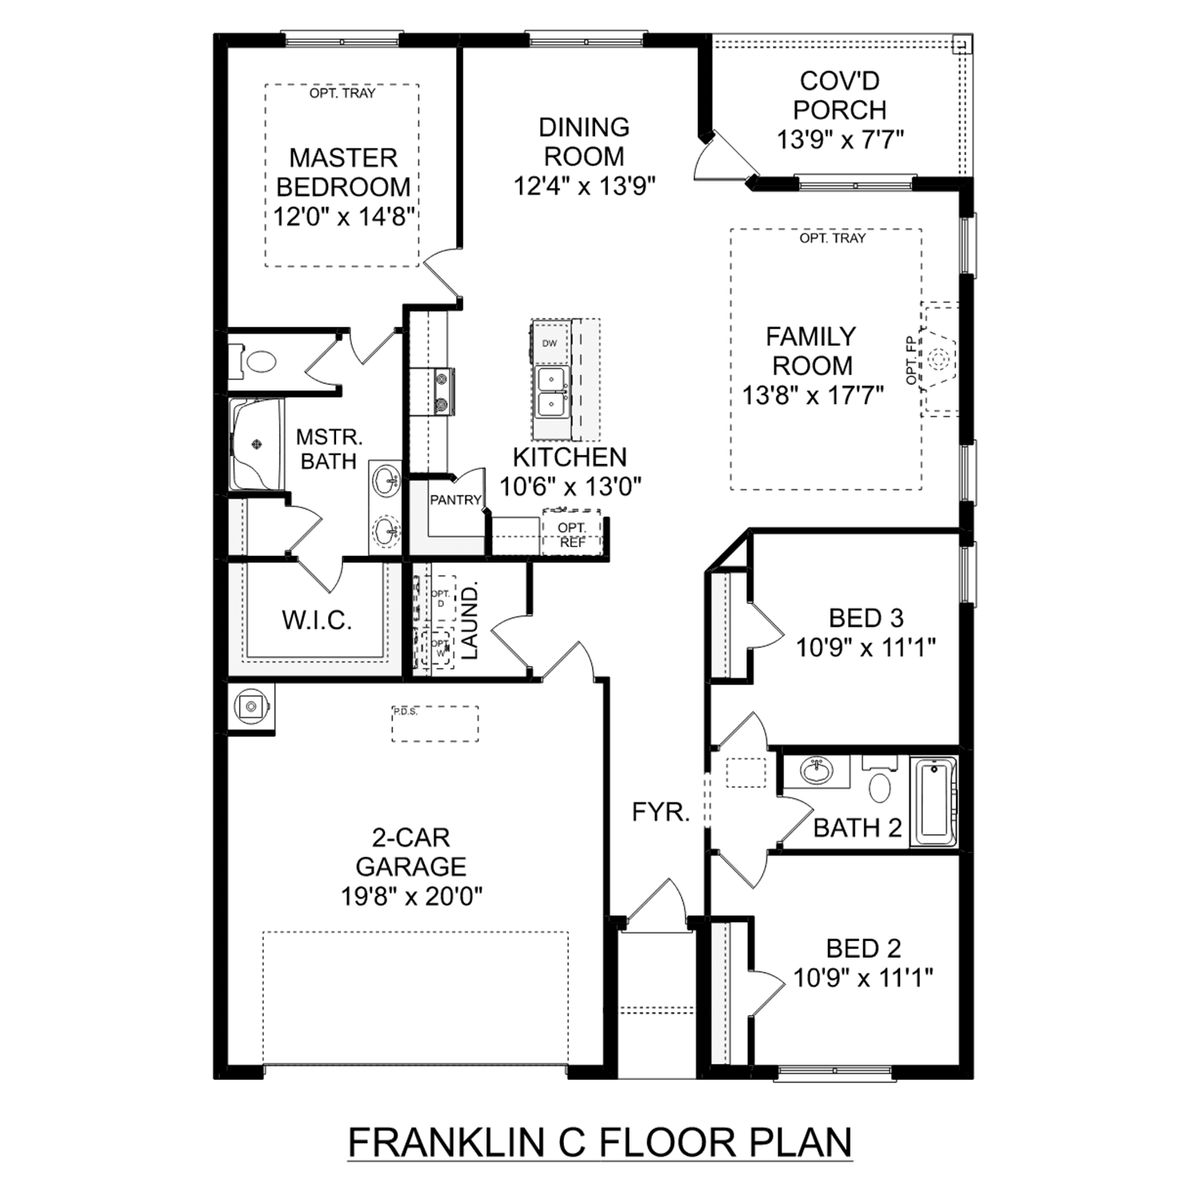 1 - The Franklin C floor plan layout for 203 Goldie Court in Davidson Homes' Heritage Lakes community.